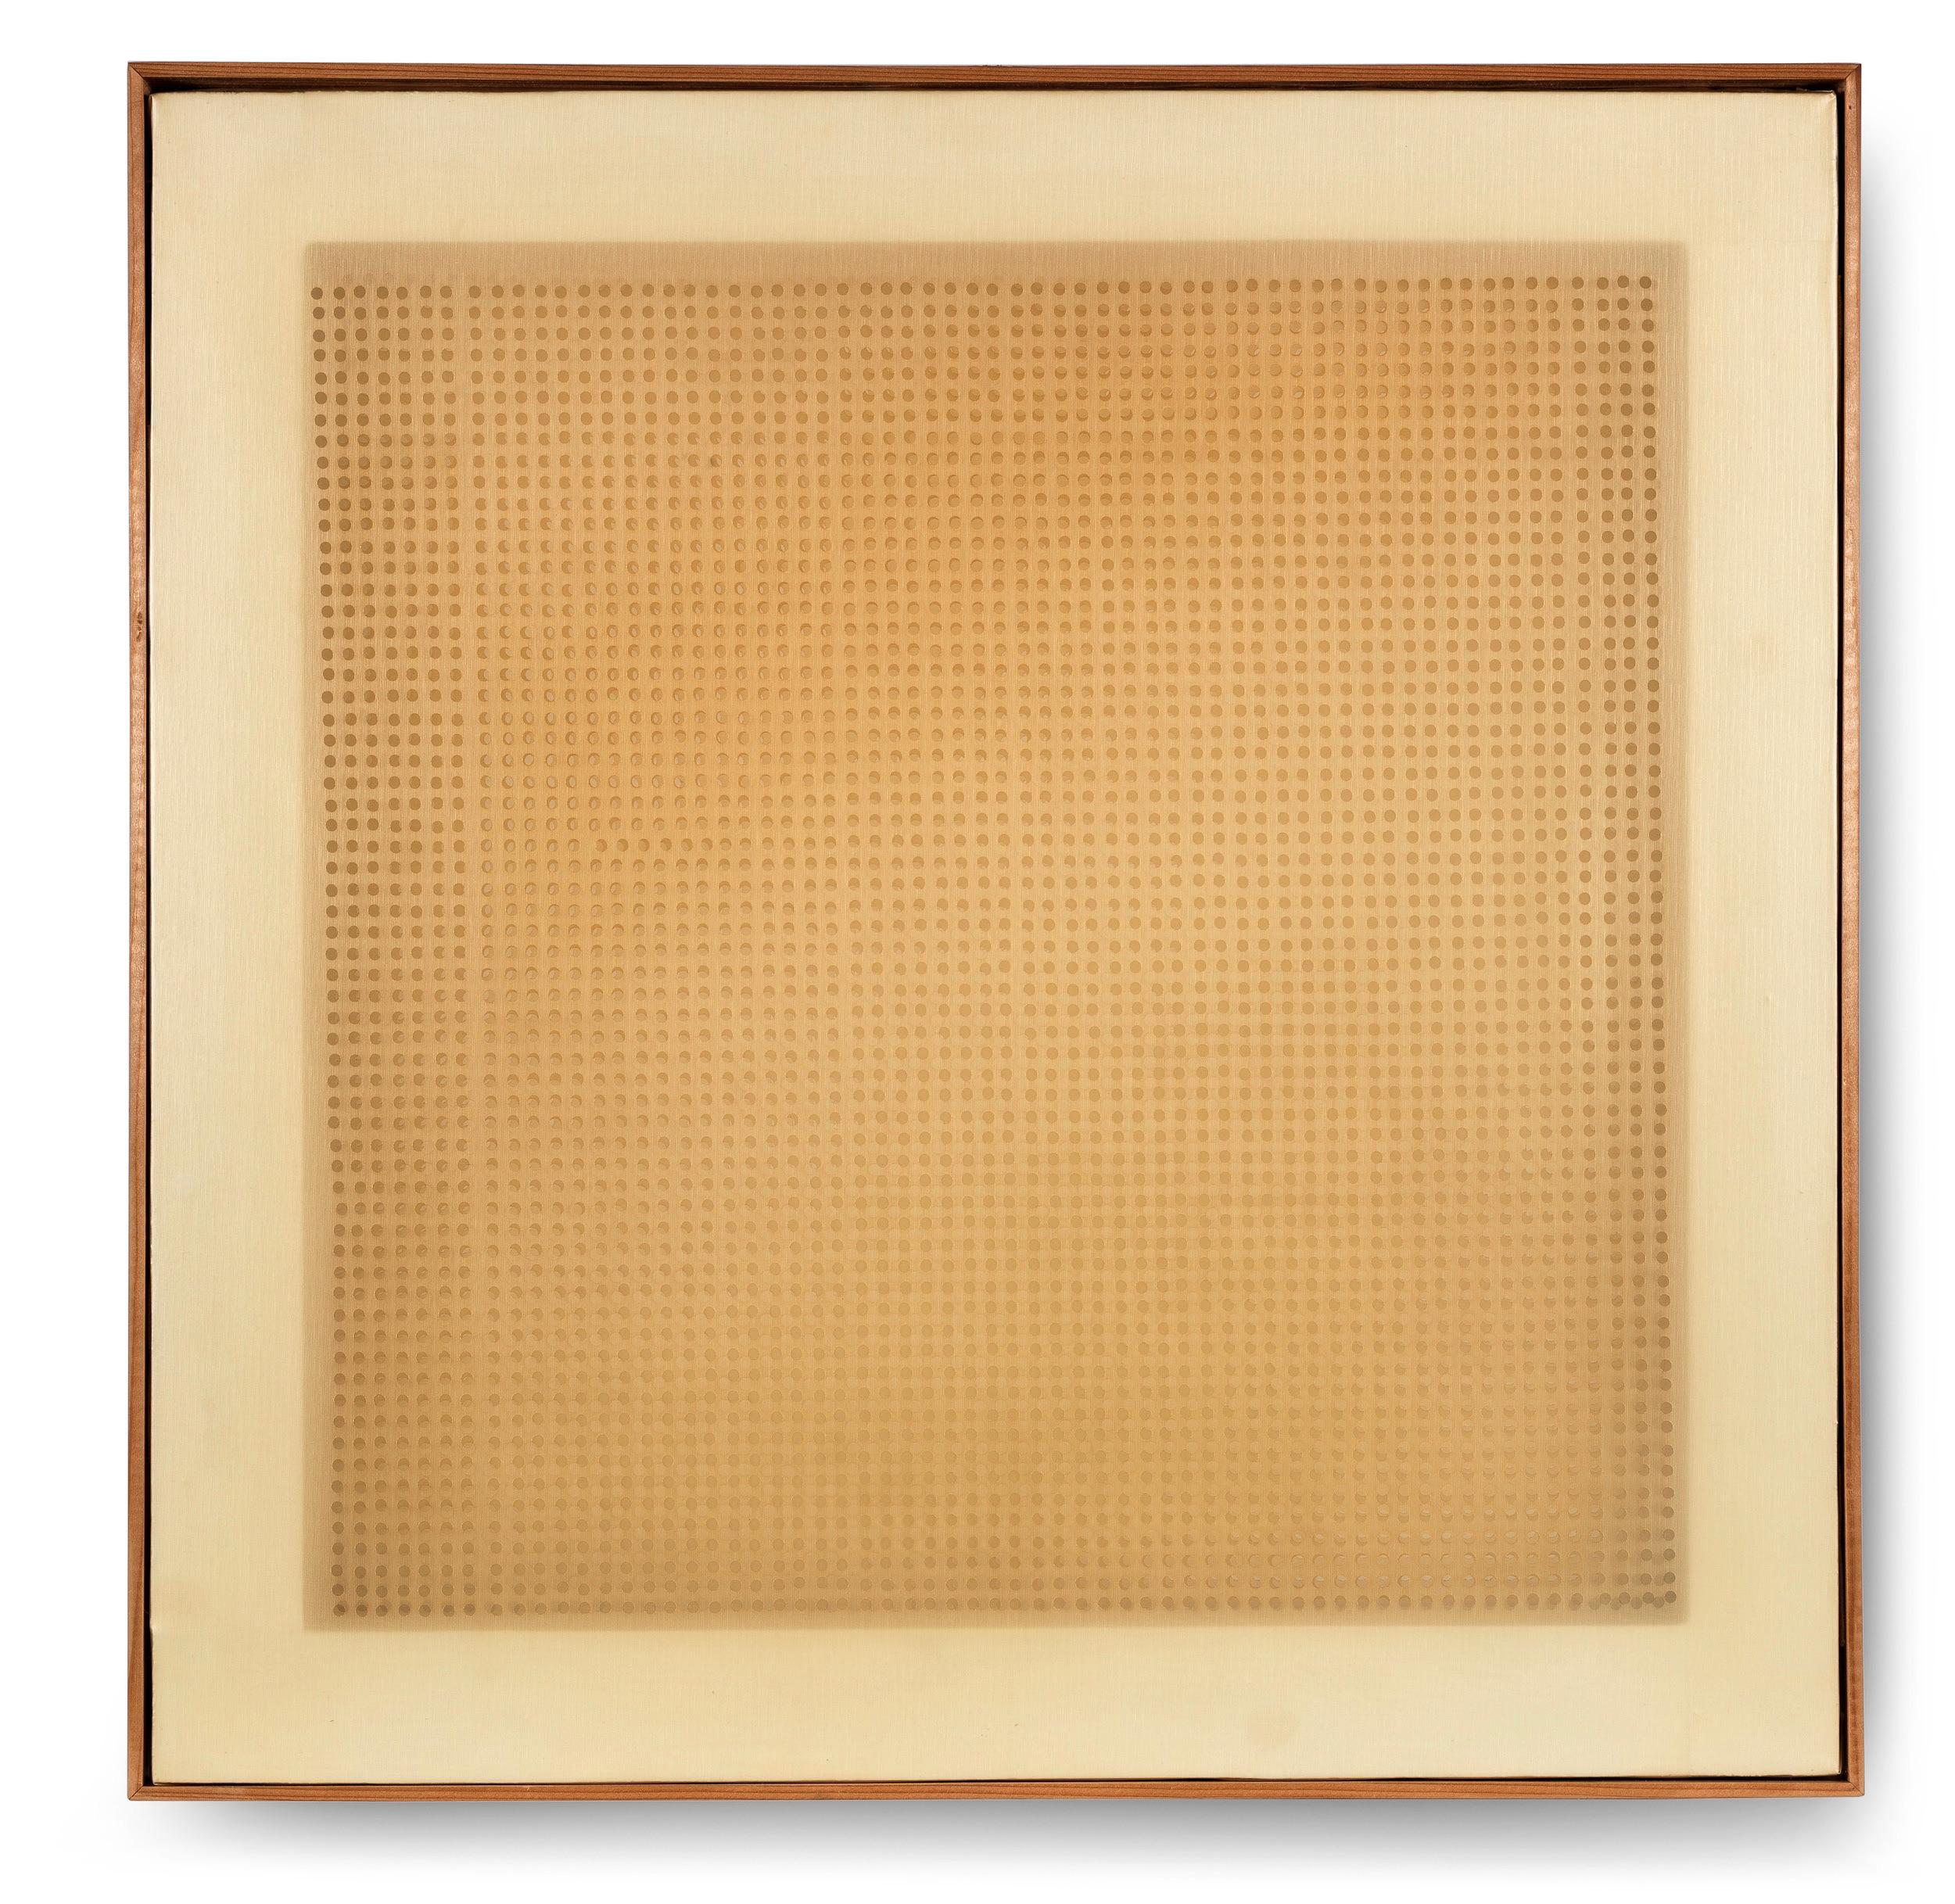 Dadamaino Abstract Painting - Volume A Moduli Sfasati, 1960, perforated and superimposed plastic canvases 